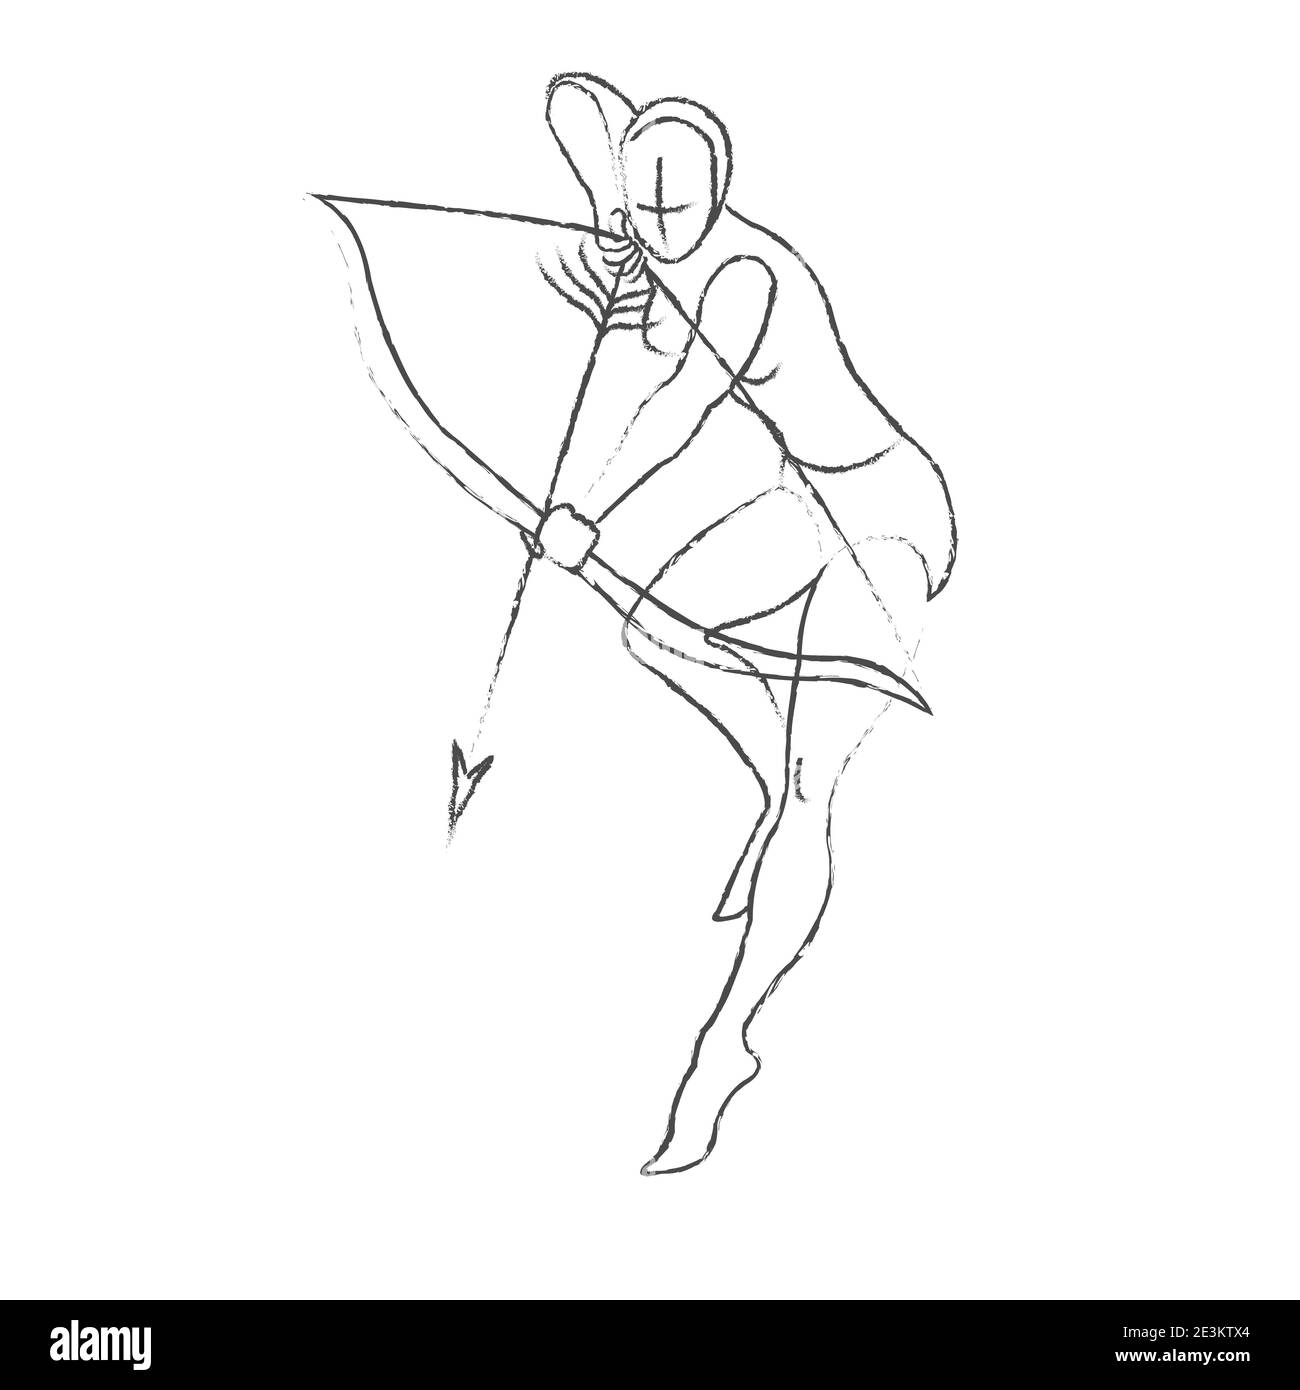 Cool girl | Figure drawing reference, Dynamic poses drawing, Drawing poses